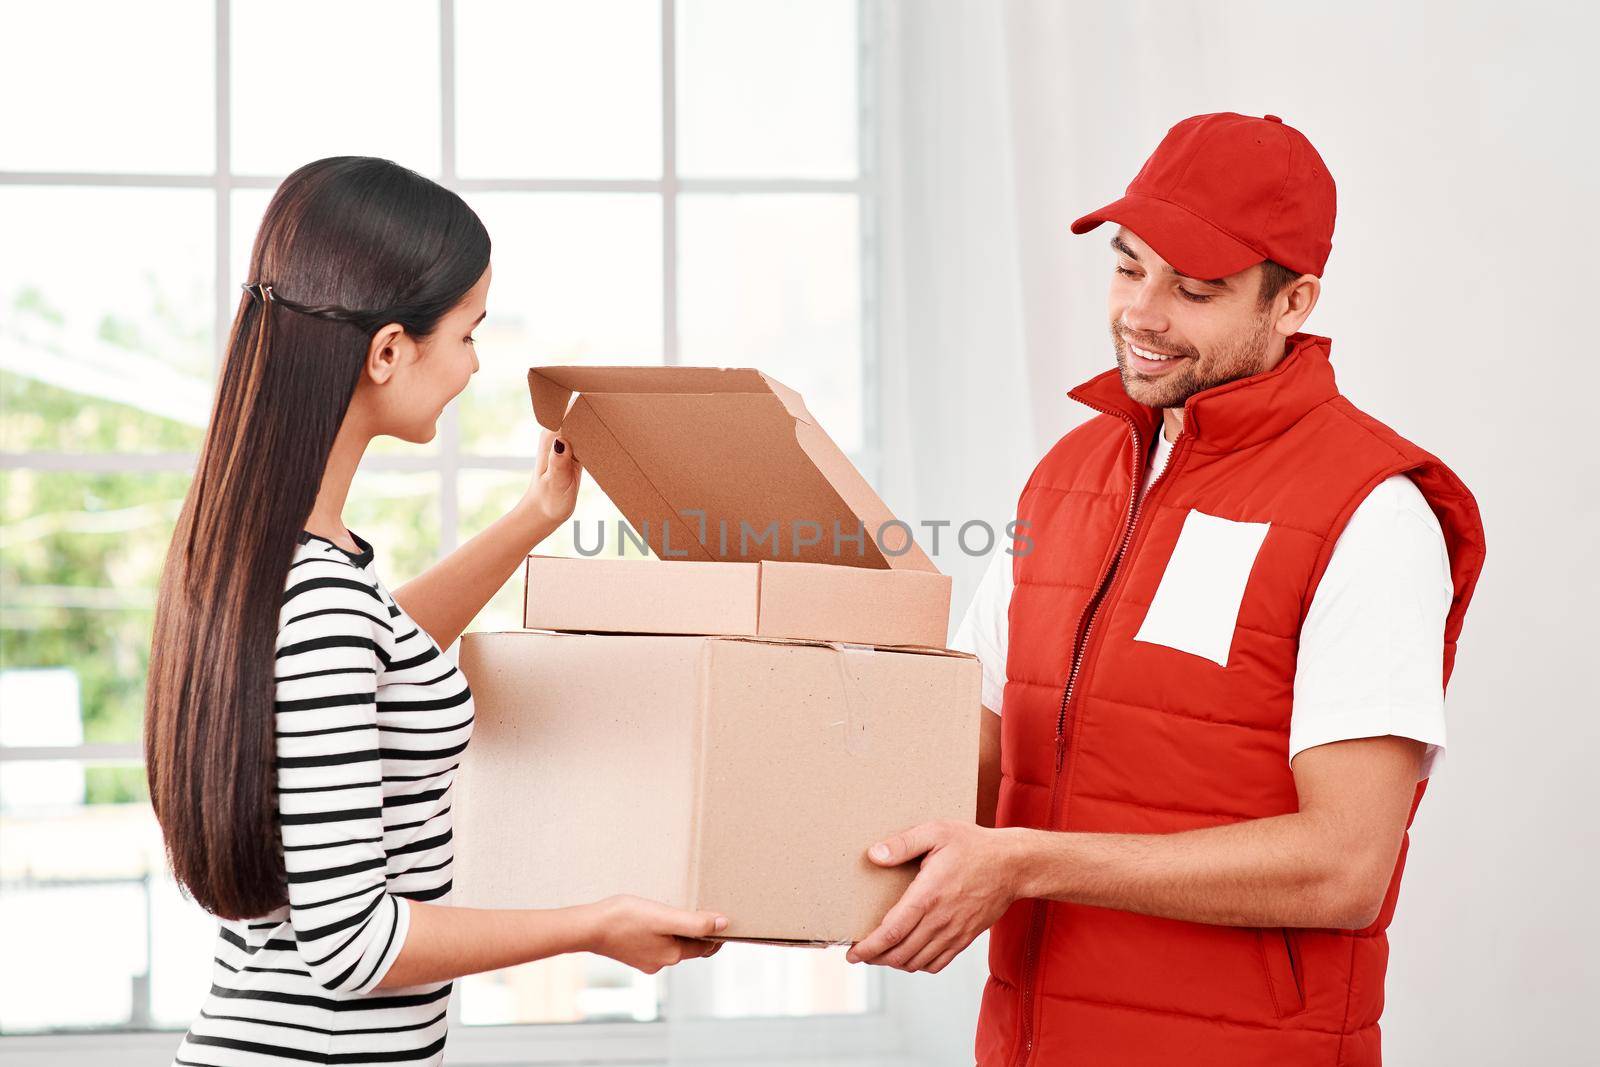 Cheerful postman wearing red postal uniform is delivering parcels to a satisfied client. He brings carton boxes to its owner. Dark-haired woman opens parcel, she is glad to receive it. Friendly worker, high quality delivery service. Indoors. Bright interior.